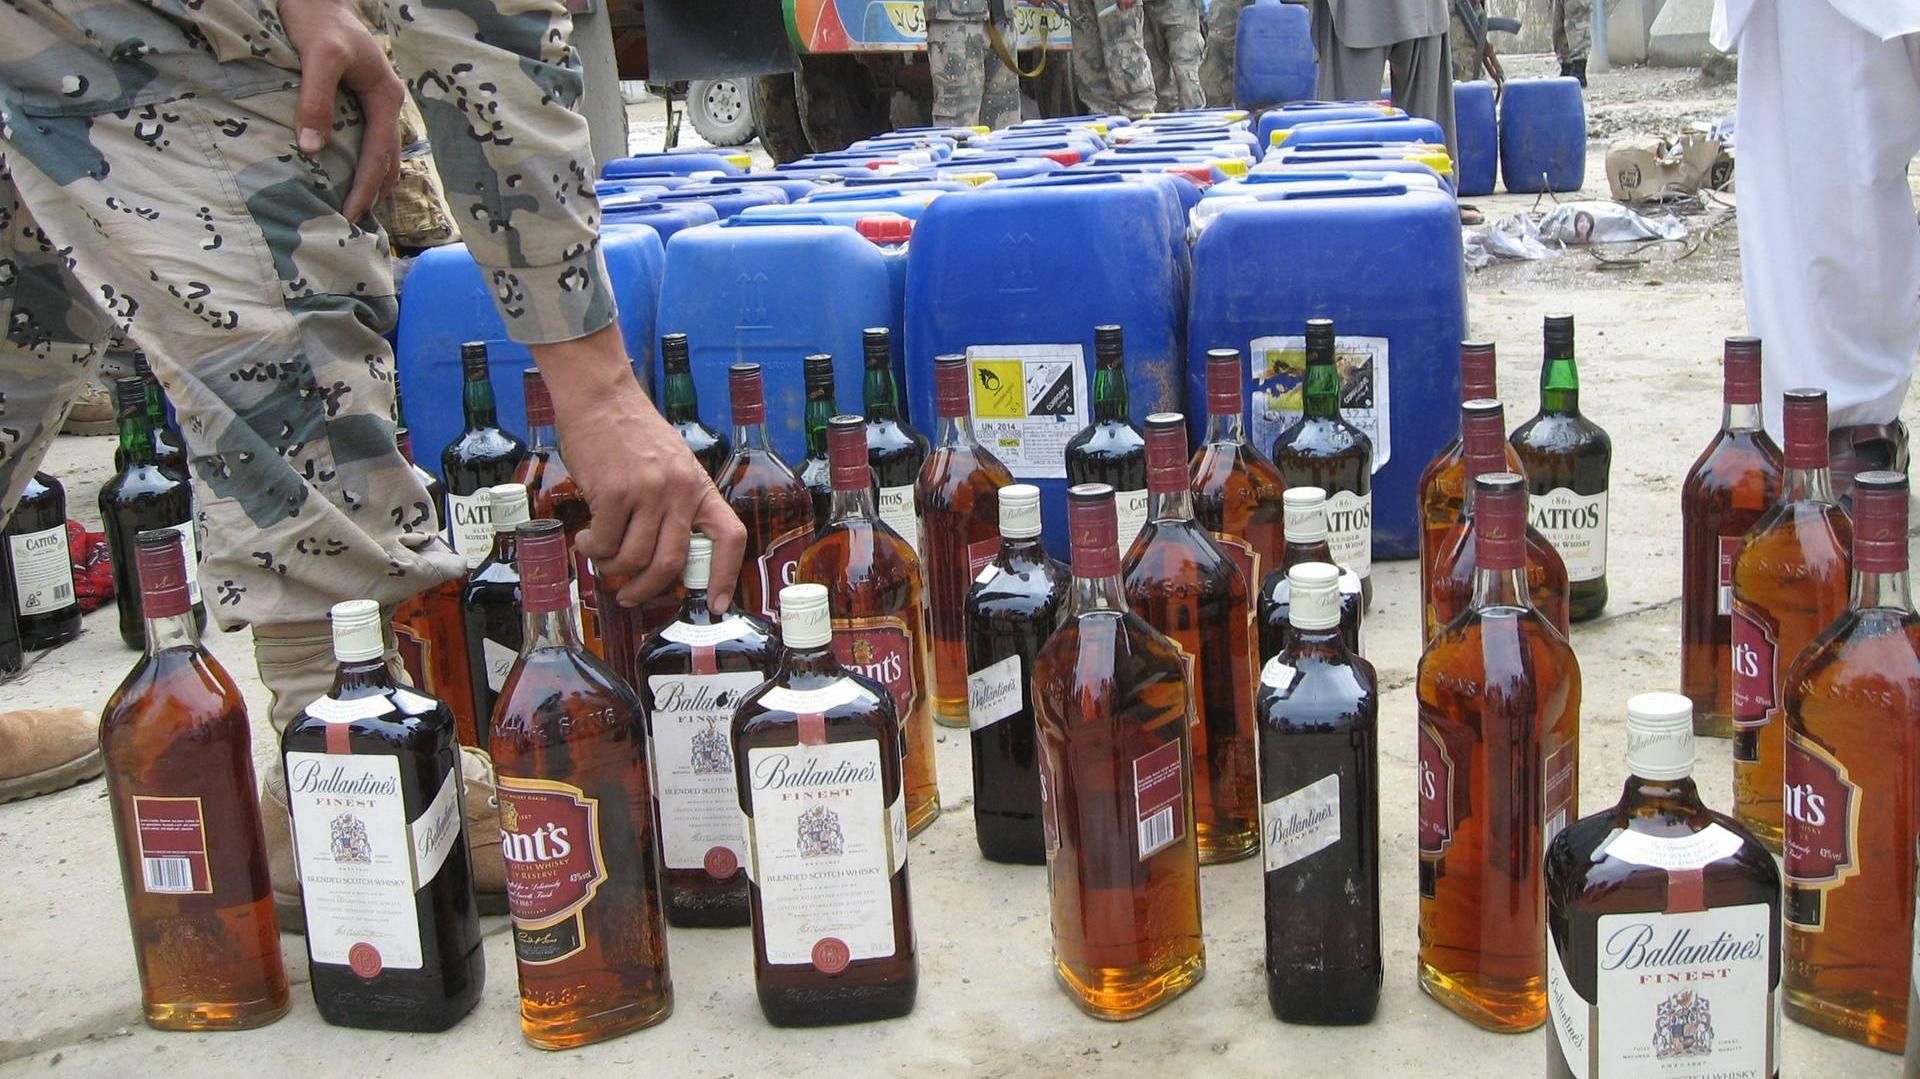 3,000 litres of alcohol were poured into kabul canal by talibans